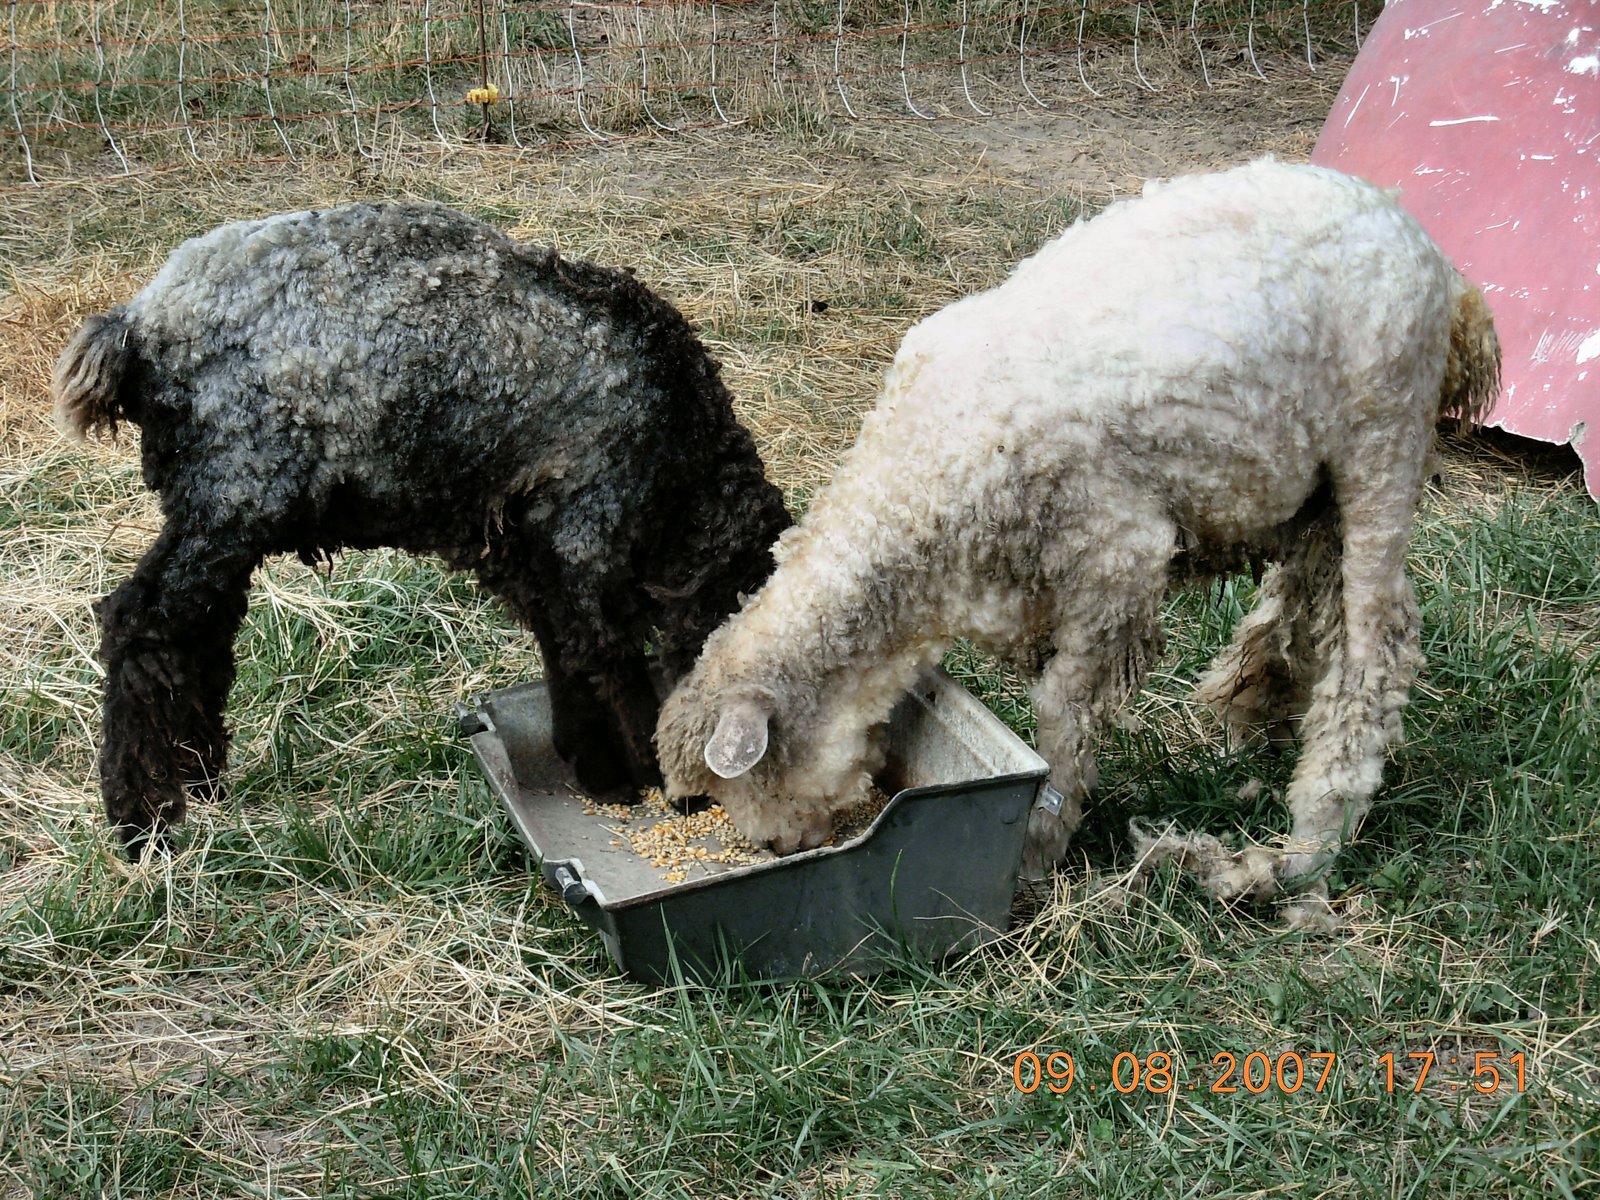 [Larry+&+Curly+after+shearing.jpg]